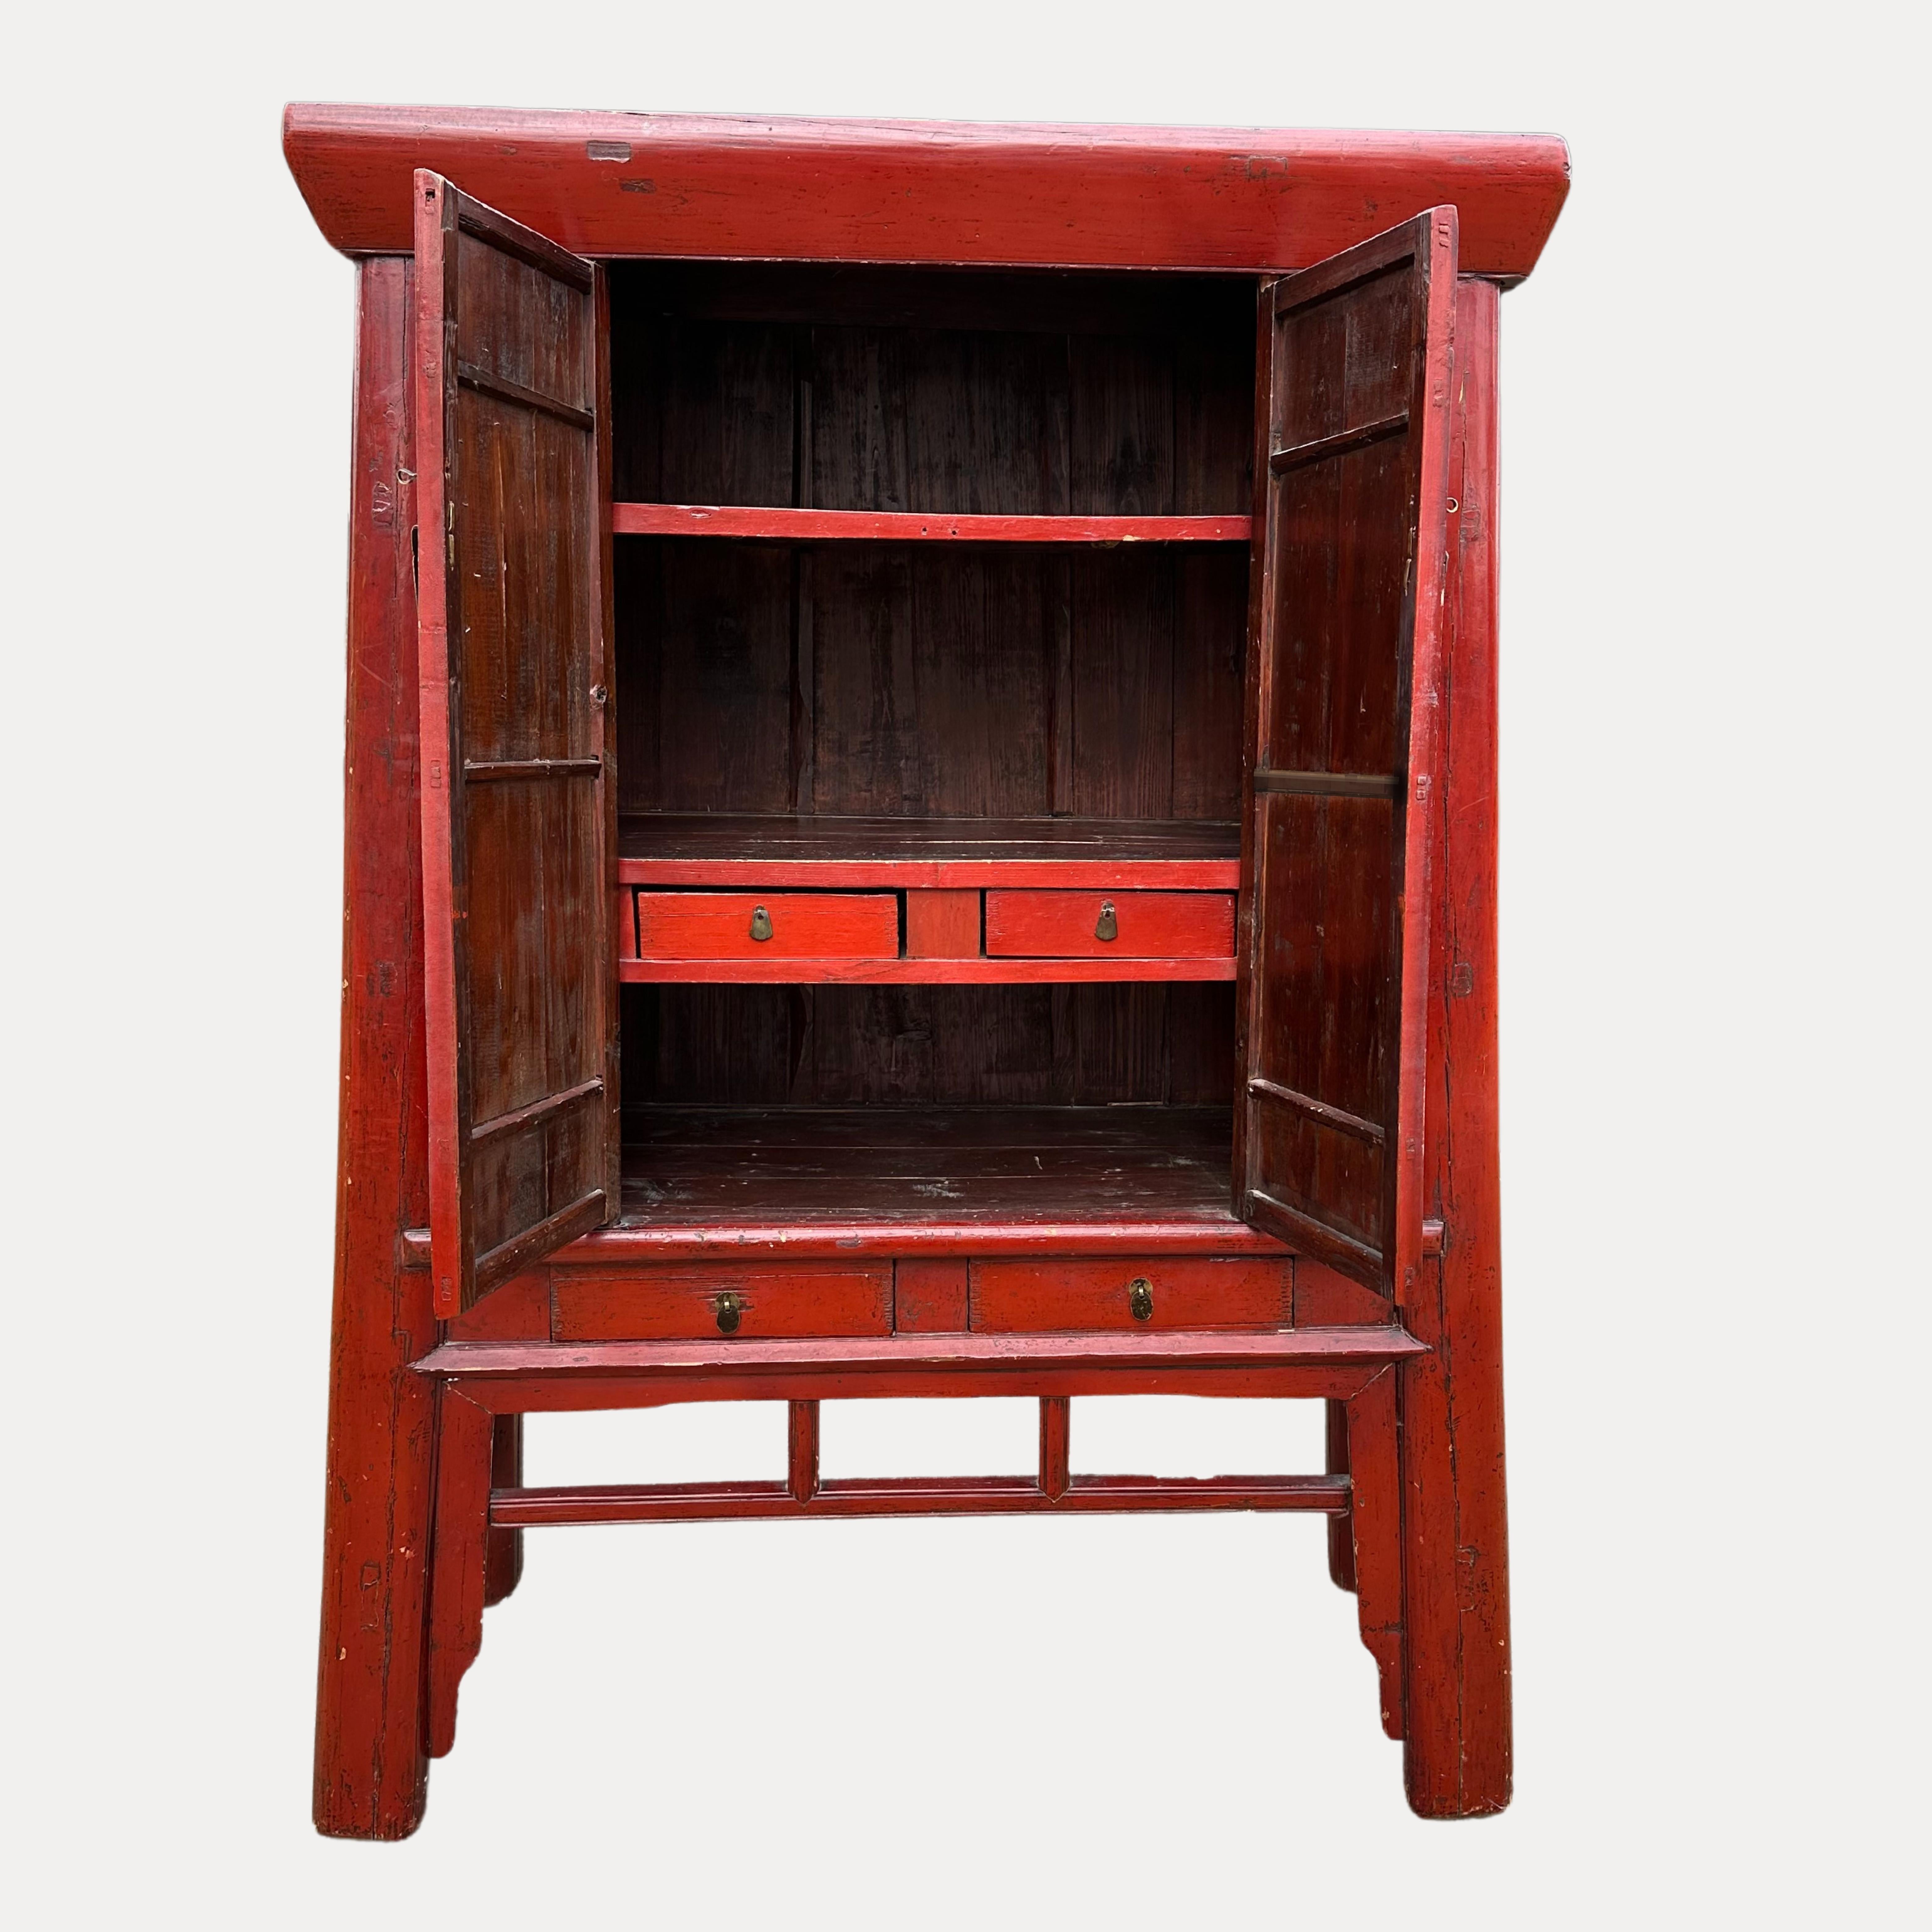 A Chinese Qing Dynasty Ningbo red lacquered four door wedding cabinet from 19th century, with a huge brass butterfly on the front inlaid with semi precious stones.
Created in Eastern China during the Qing Dynasty, this wedding cabinet draws